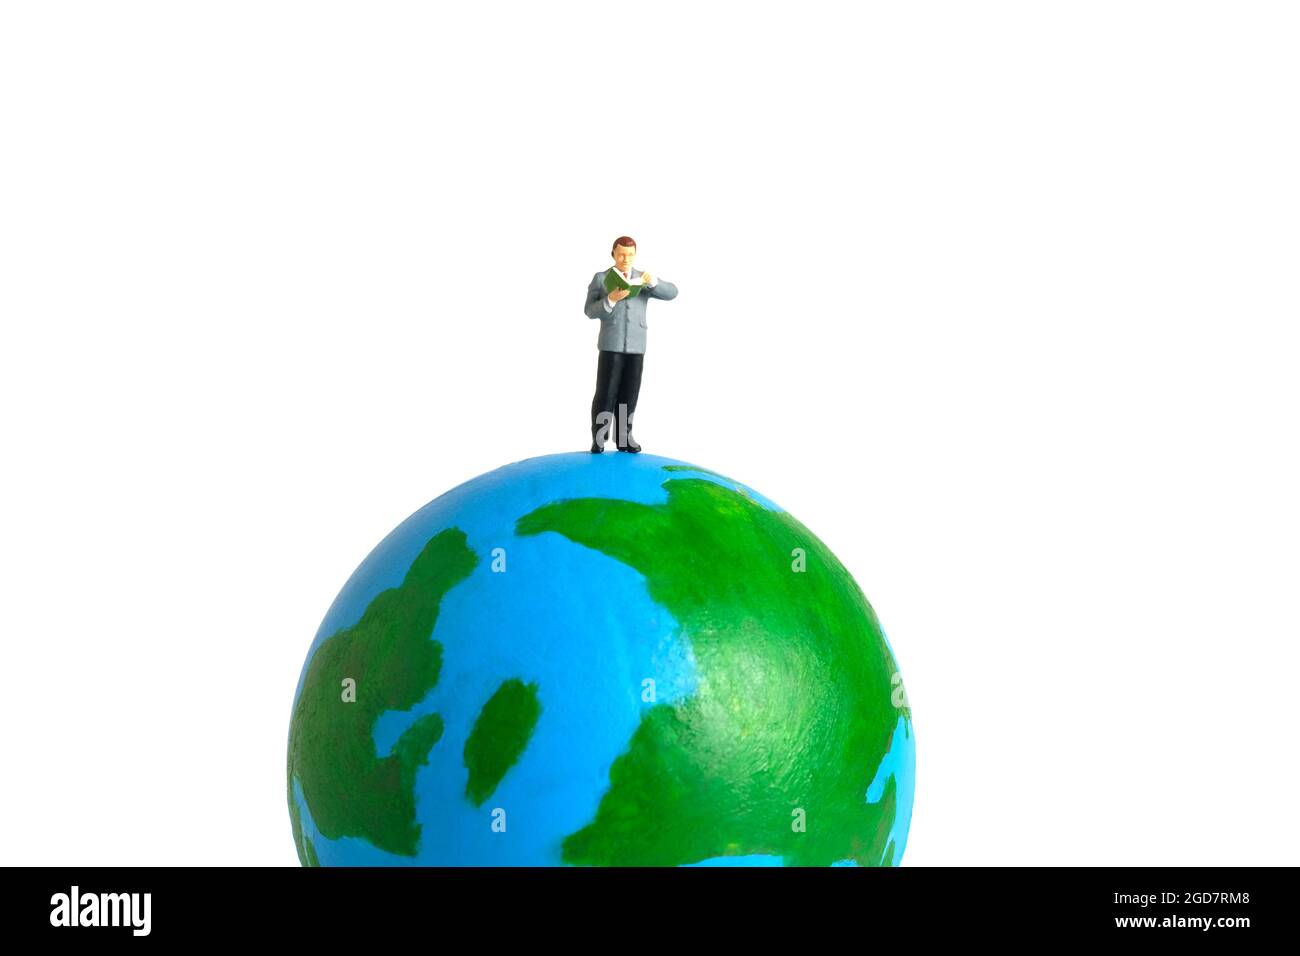 Miniature people toy figure photography. International or National reading day. A men student standing above earth globe while read a book, isolated o Stock Photo